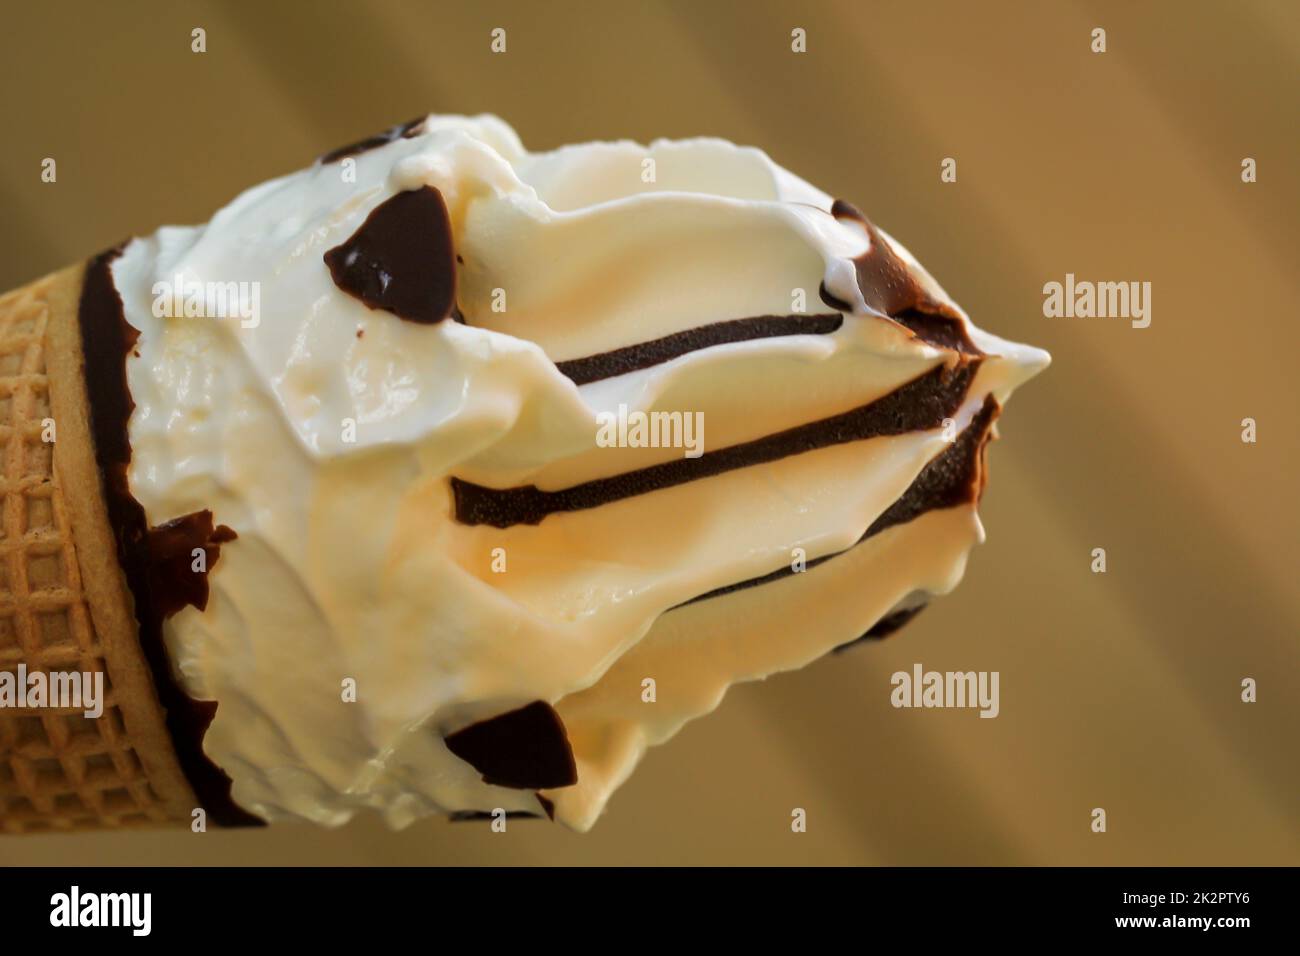 A close-up of a delicious ice cream cone with waffle, vanilla ice cream and chocolate icing. Stock Photo